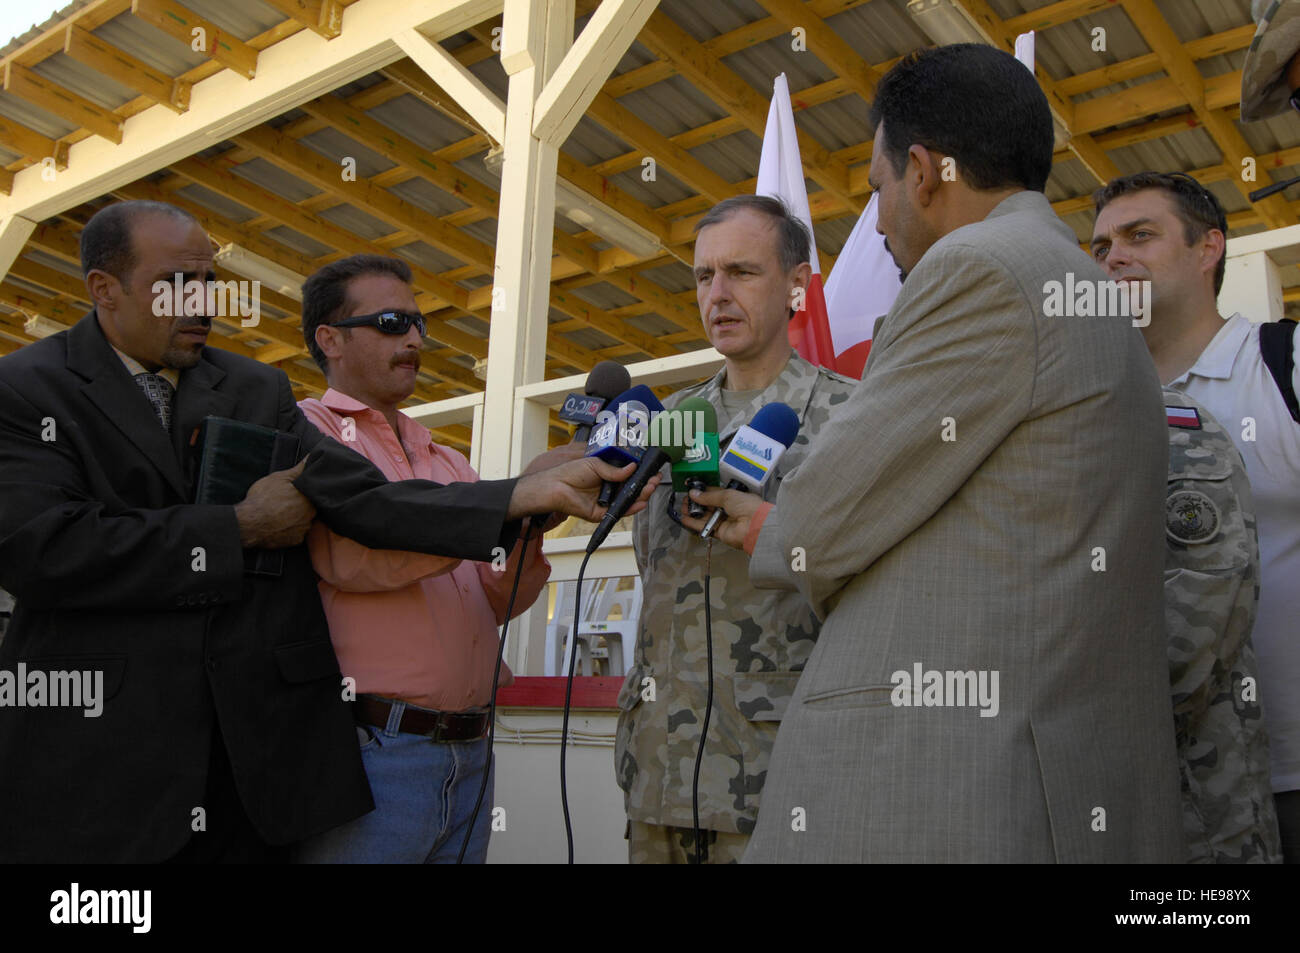 Polish Minister of Defense, Pan Bogdan Klich, center, is interviewed by members of the Iraqi media, at the conclusion of the End of Mission Ceremony for the Polish Multination Division Center ? South, Oct. 4, 2008, at Camp Echo, Iraq. Minister Klich commented on the successful cooperation between Polish and Iraqi forces and his optimism towards continued relations between Poland and a democratic Iraq.  Staff Sgt. Jessica Wilkes Stock Photo